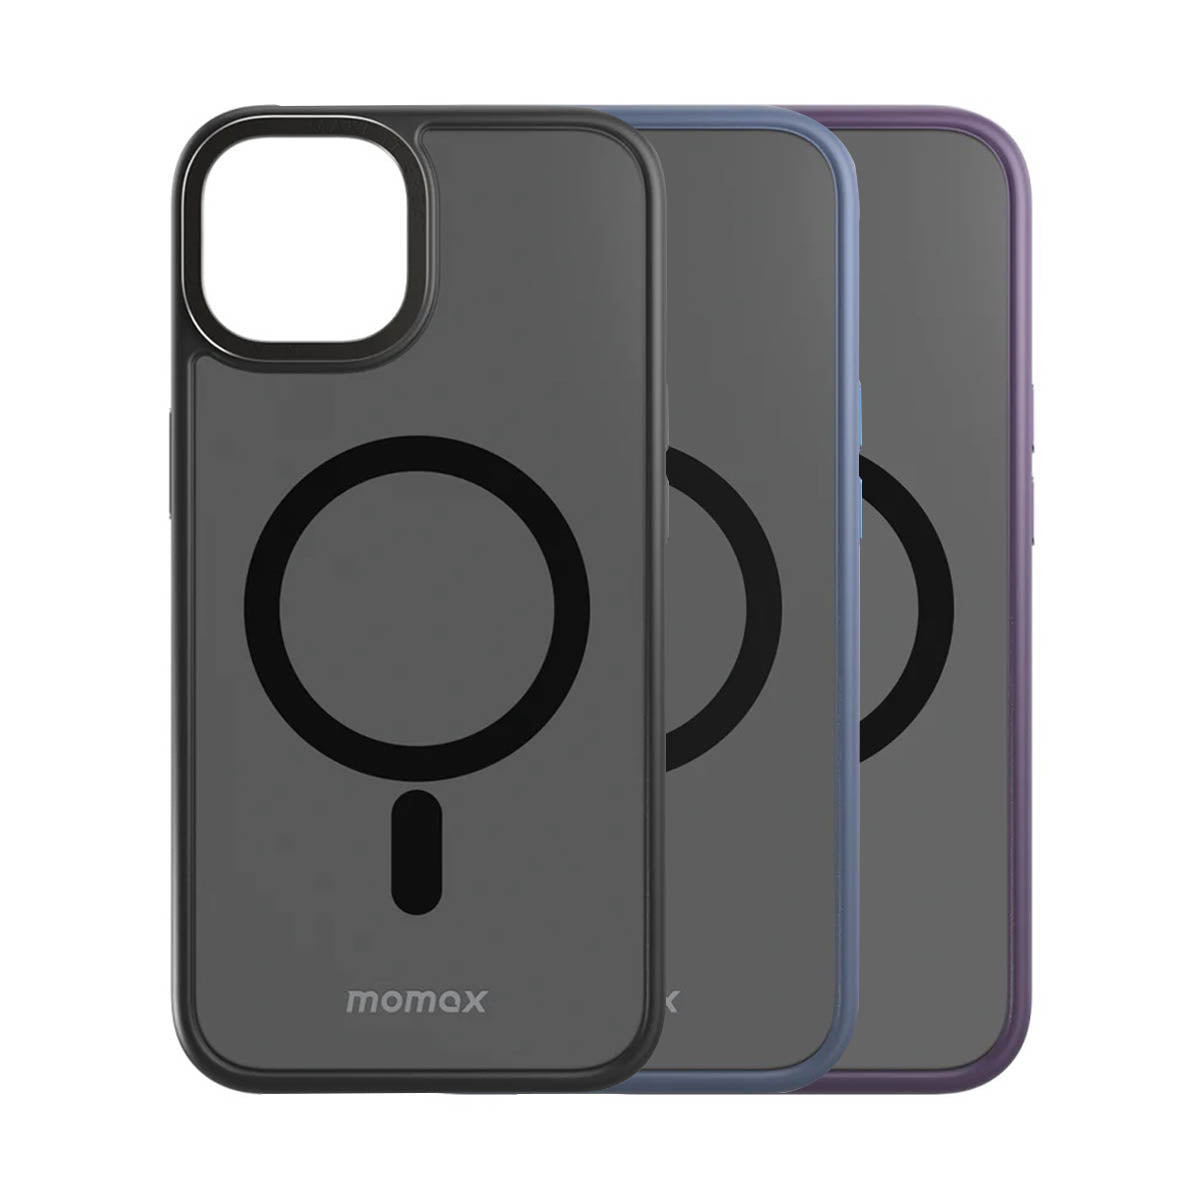 Momax Hybrid Case Magnetic Protection Case for iPhone 14 Series